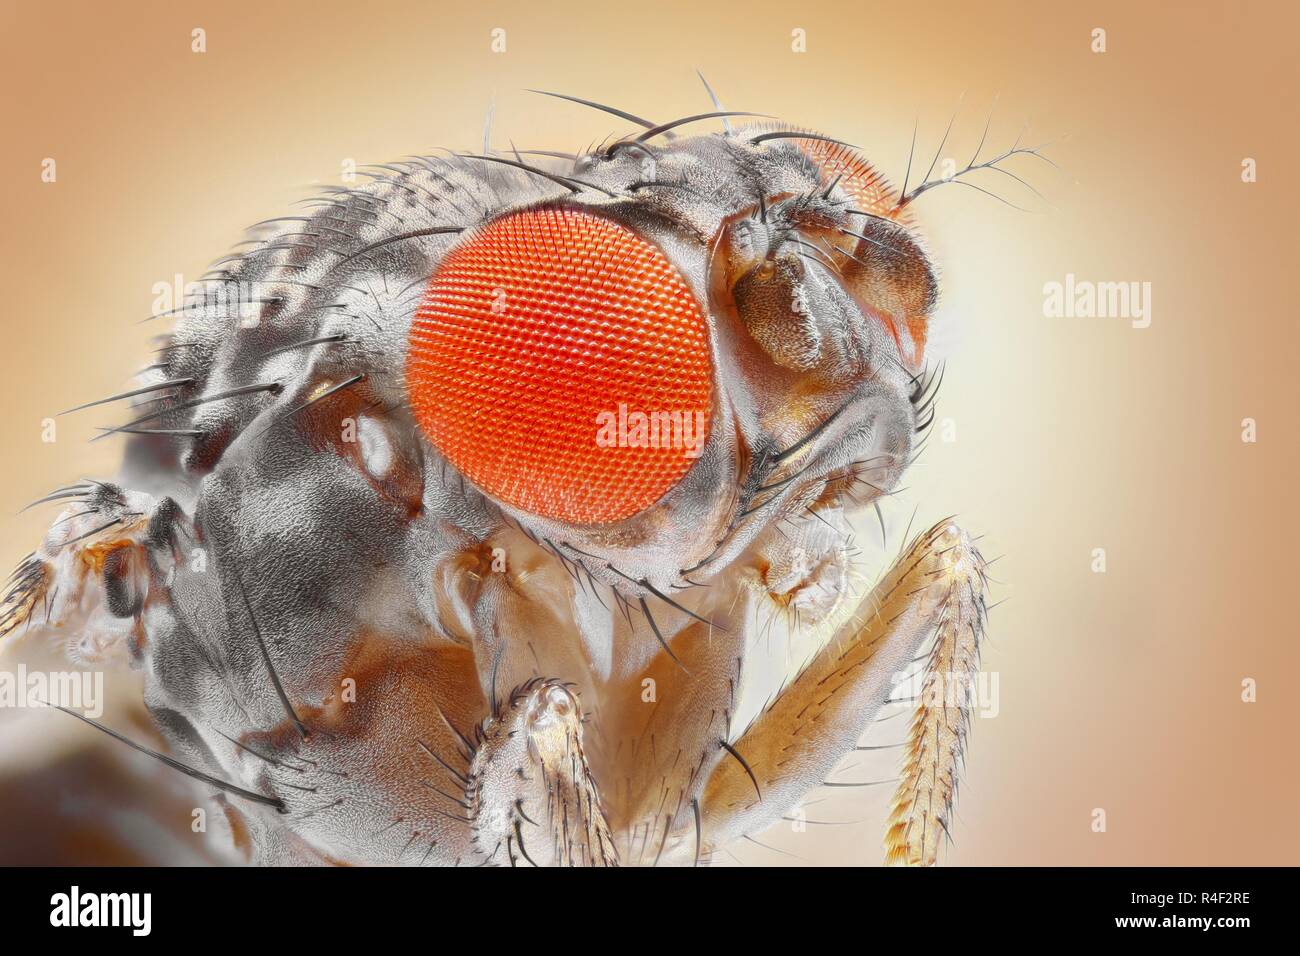 Extremely sharp and detailed image of the fruit fly at an extreme magnification taken with a microscope objective. Stock Photo